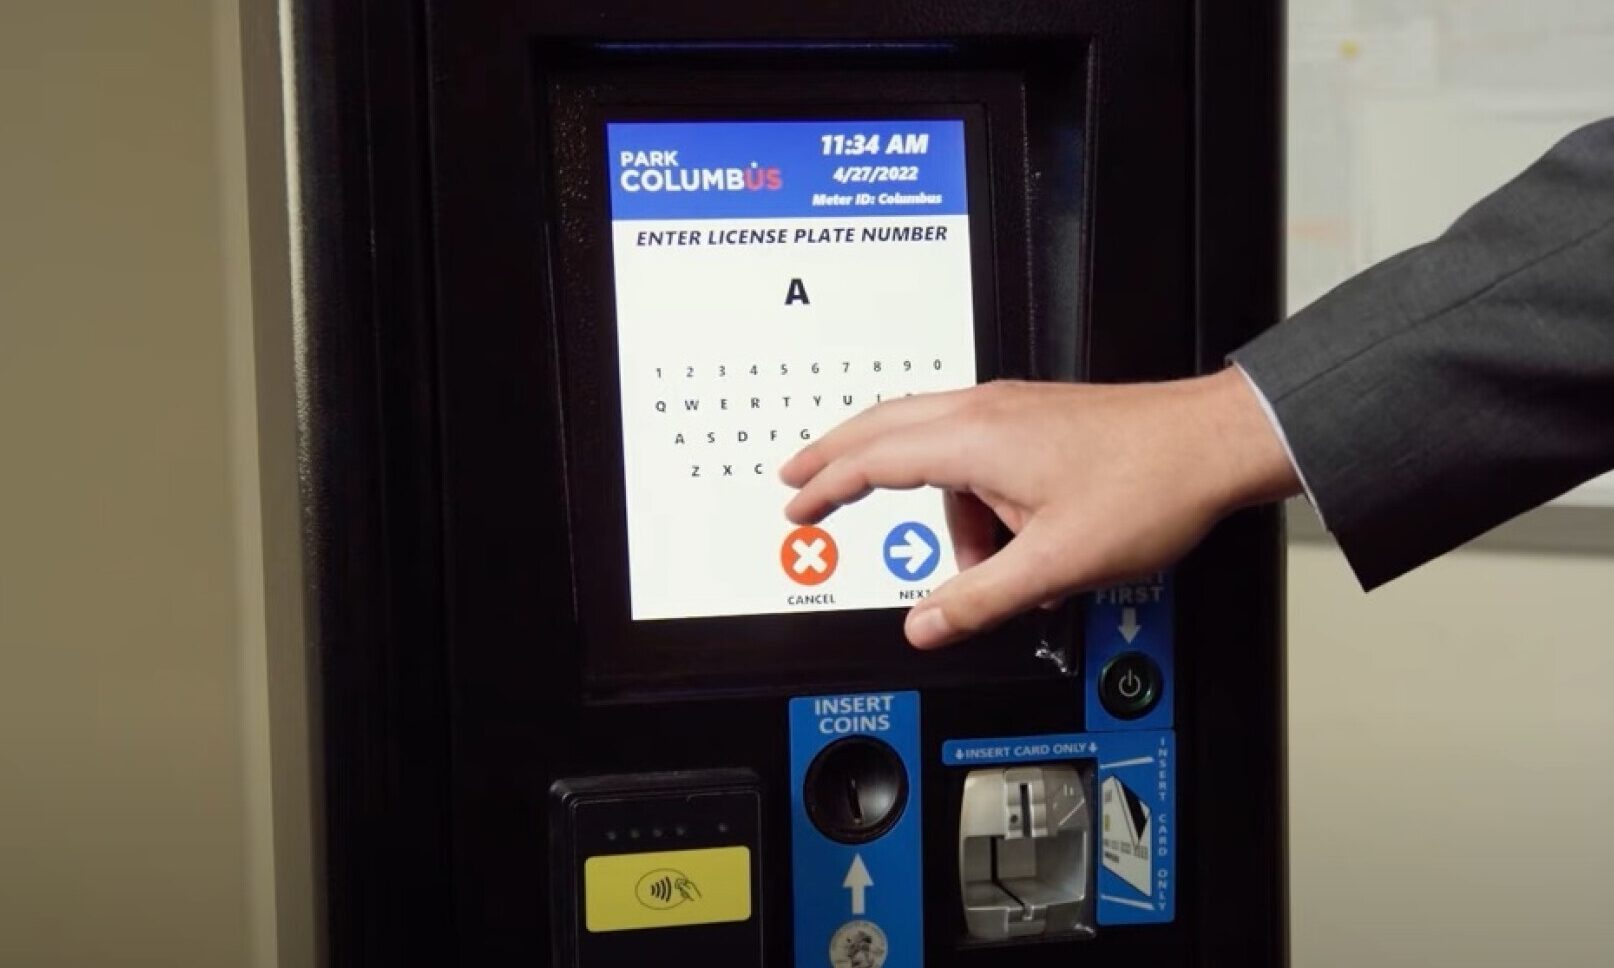 Beginning in May, the City of Columbus will begin replacing parking meters with new pay-by-plate kiosks.